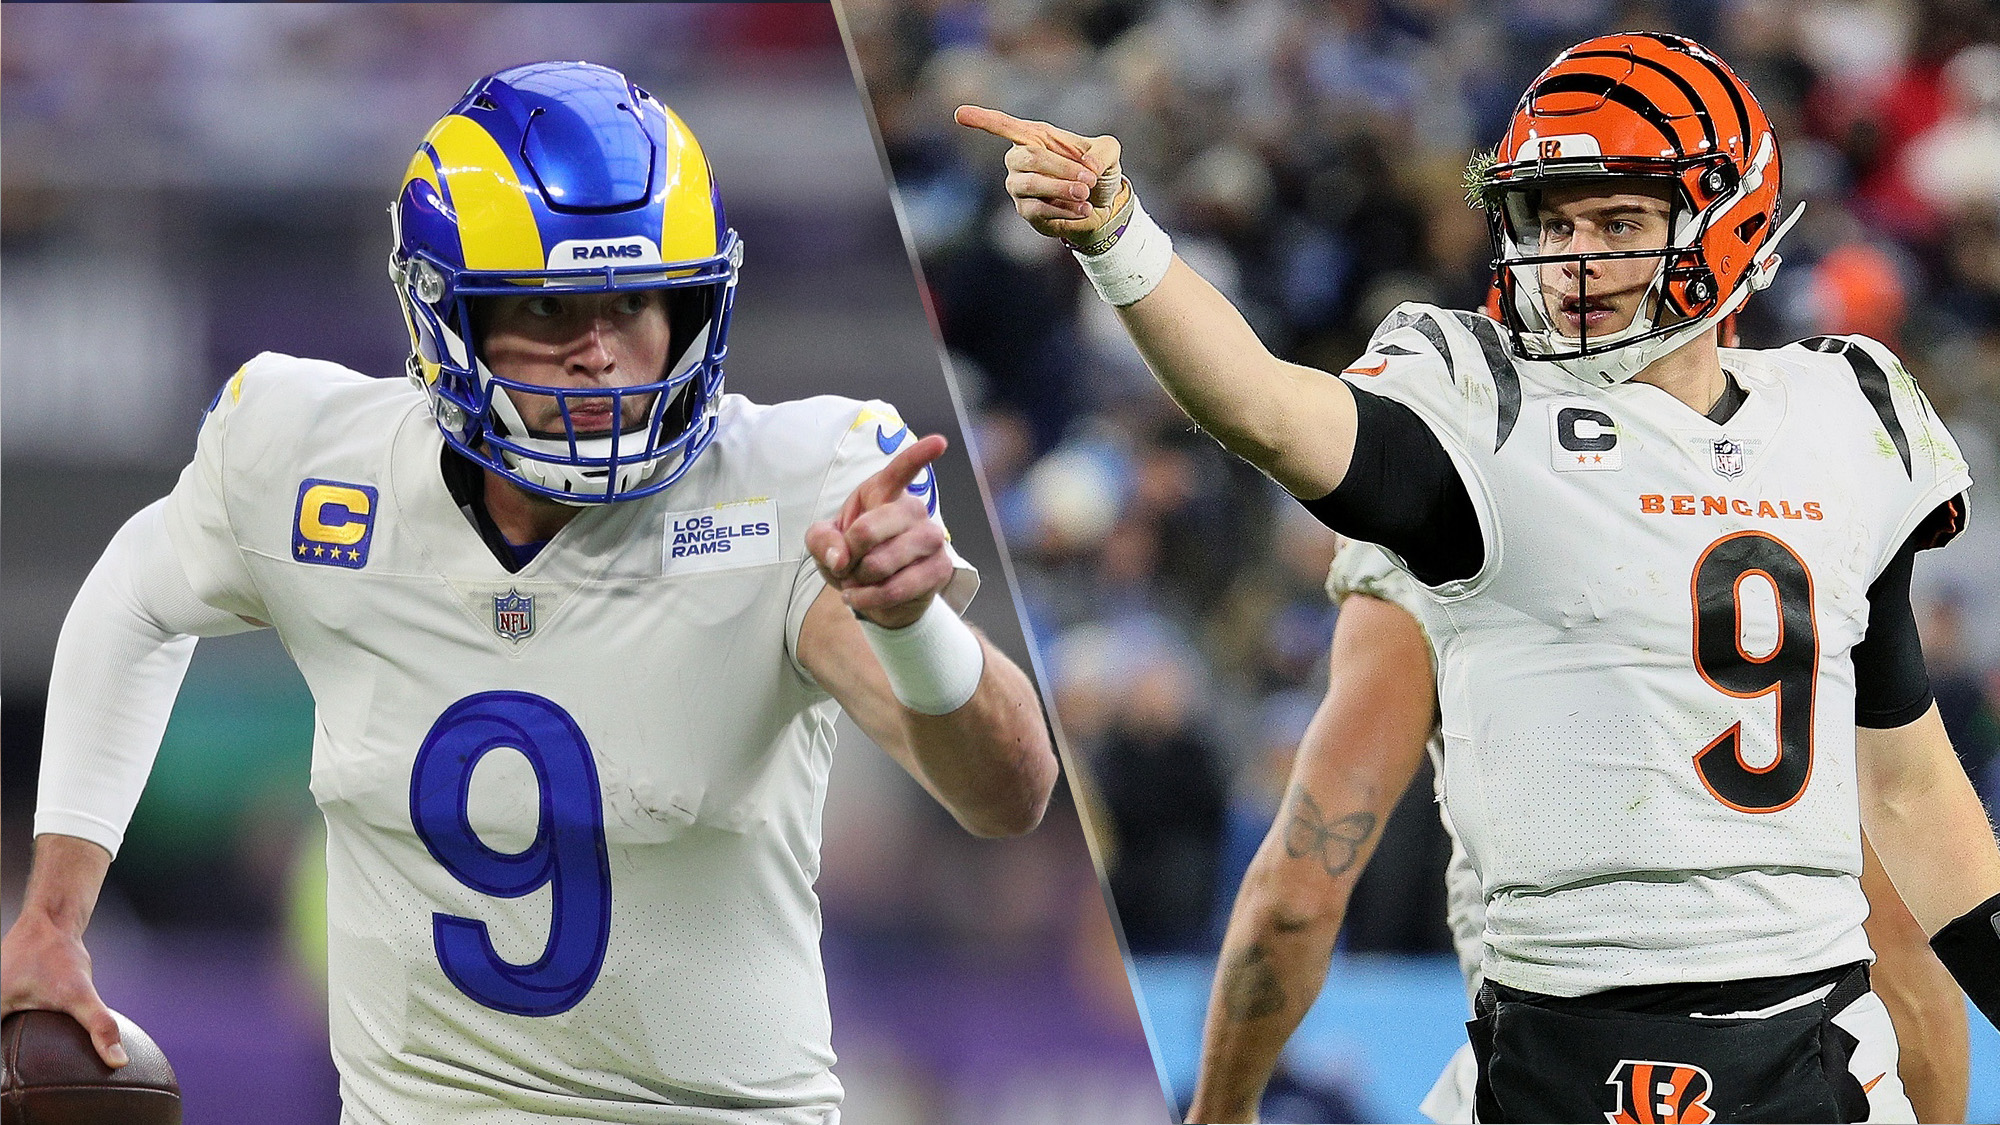 How to Stream Rams vs Bengals Live Free With bet365 - NFL Week 3